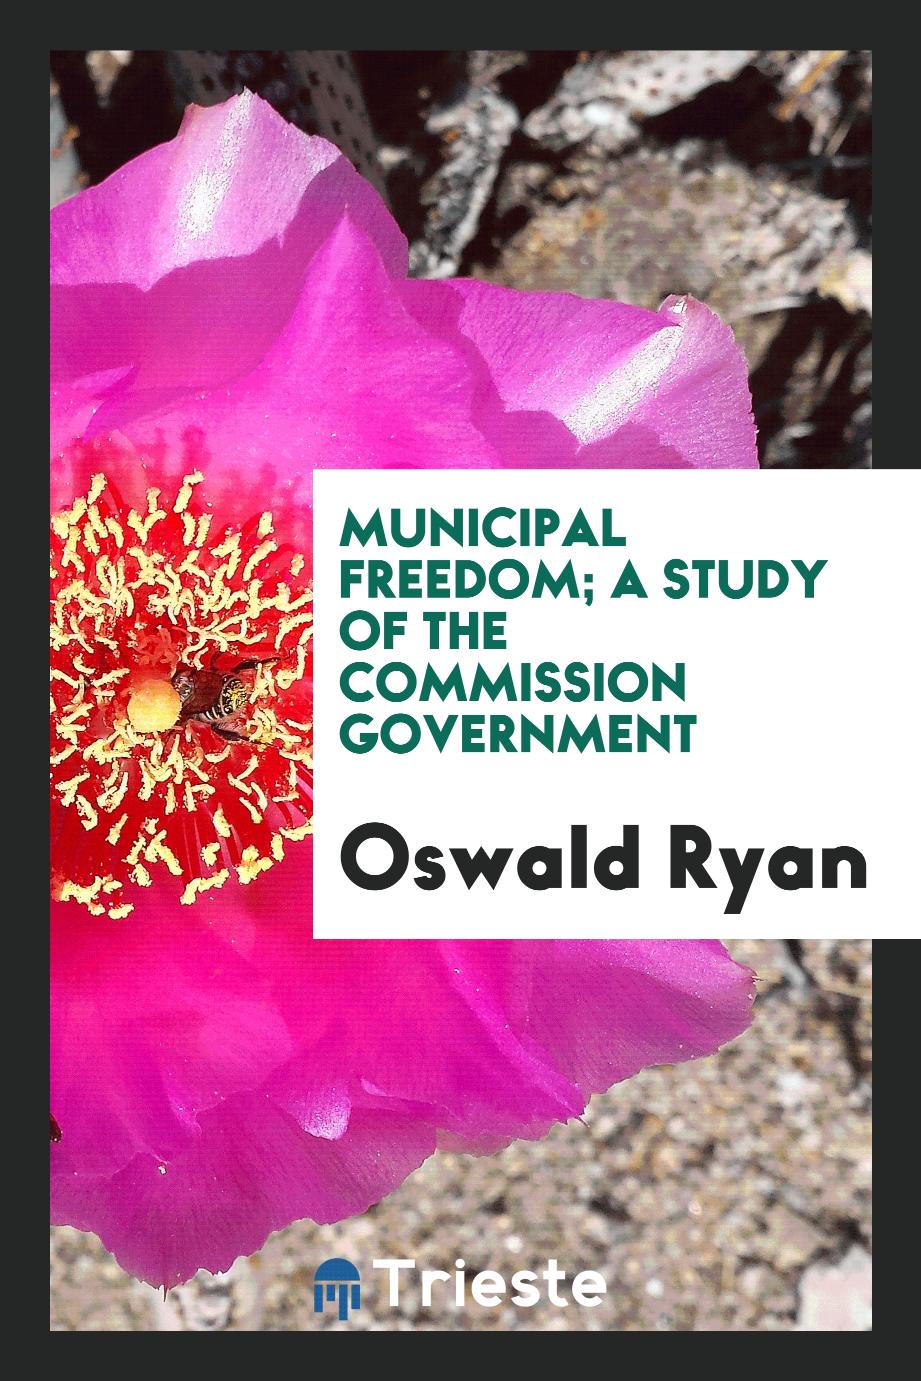 Municipal freedom; a study of the commission government